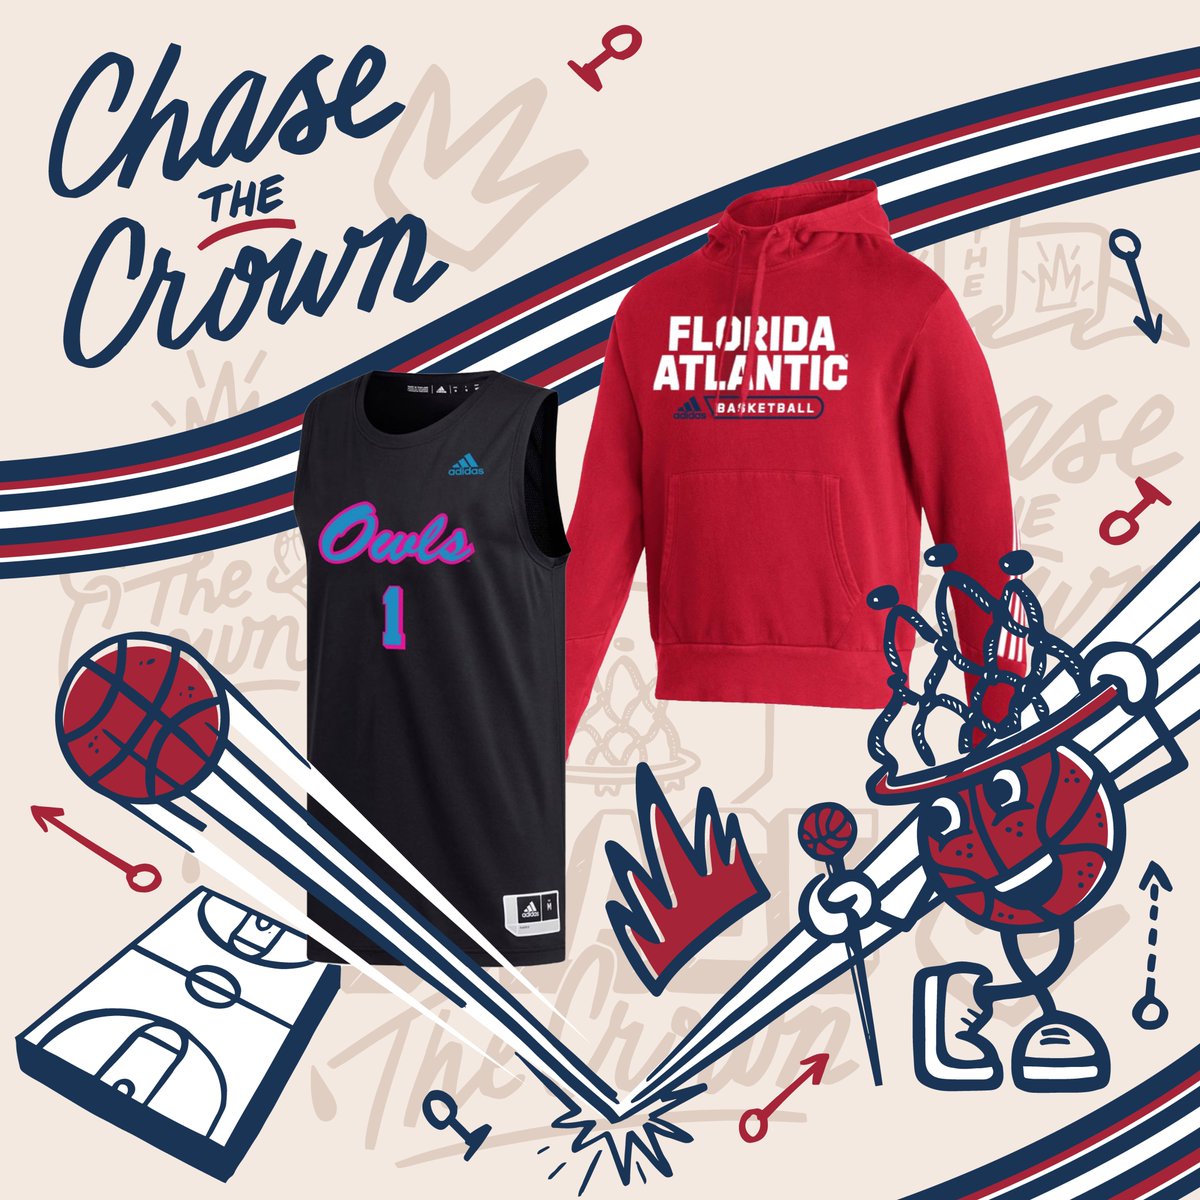 It’s go time! Cheer on @FAUMBB as they Chase the Crown in the newest basketball gear 👉social.fau.edu/3wOVUUt

#ChaseTheCrown👑🏀